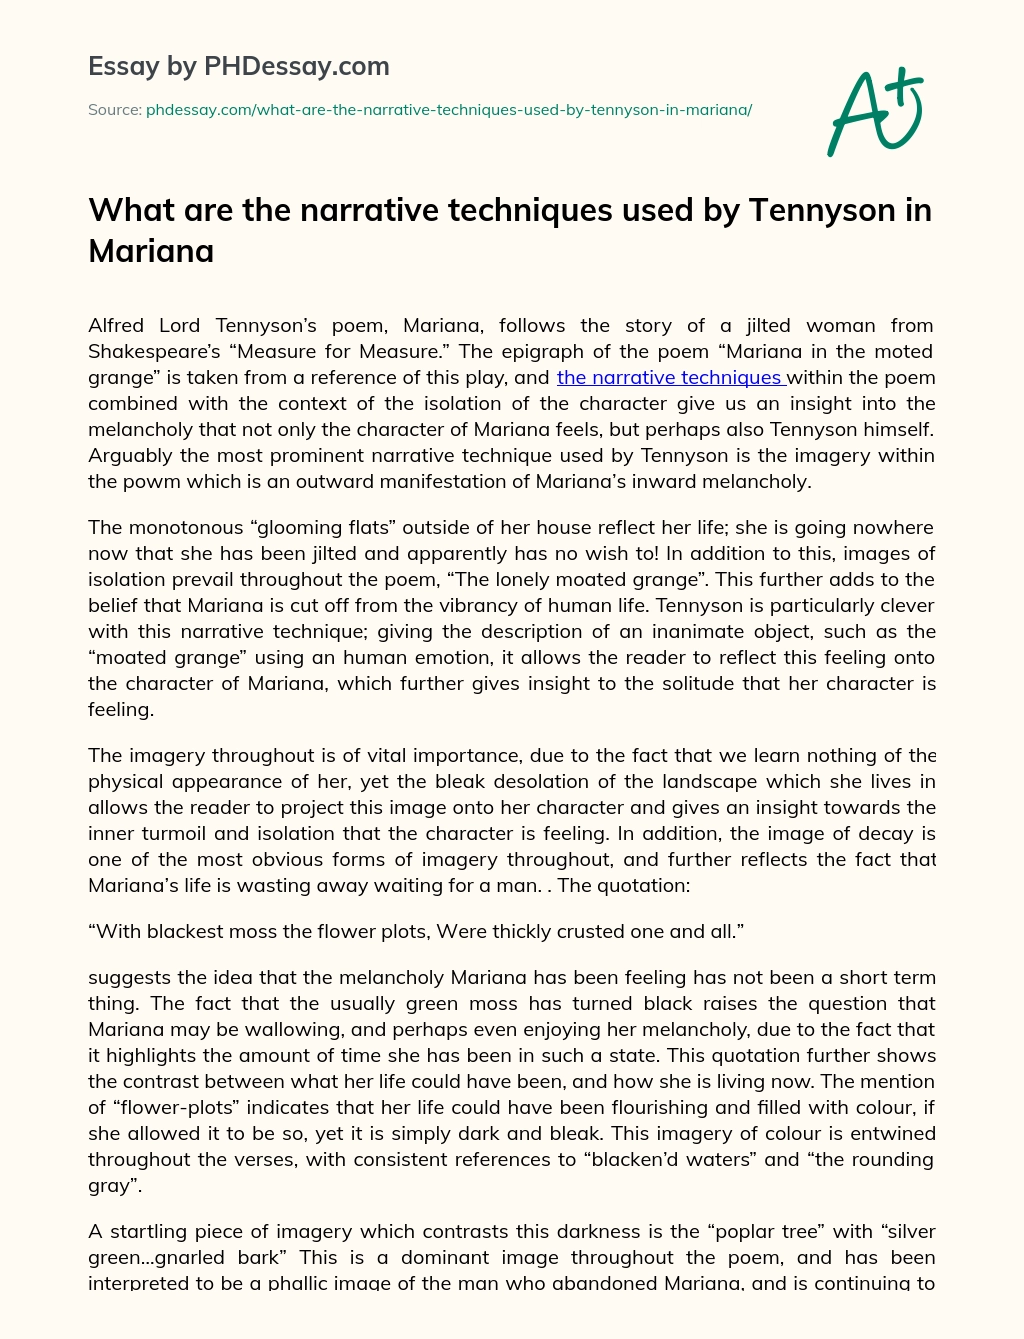 What are the narrative techniques used by Tennyson in Mariana essay